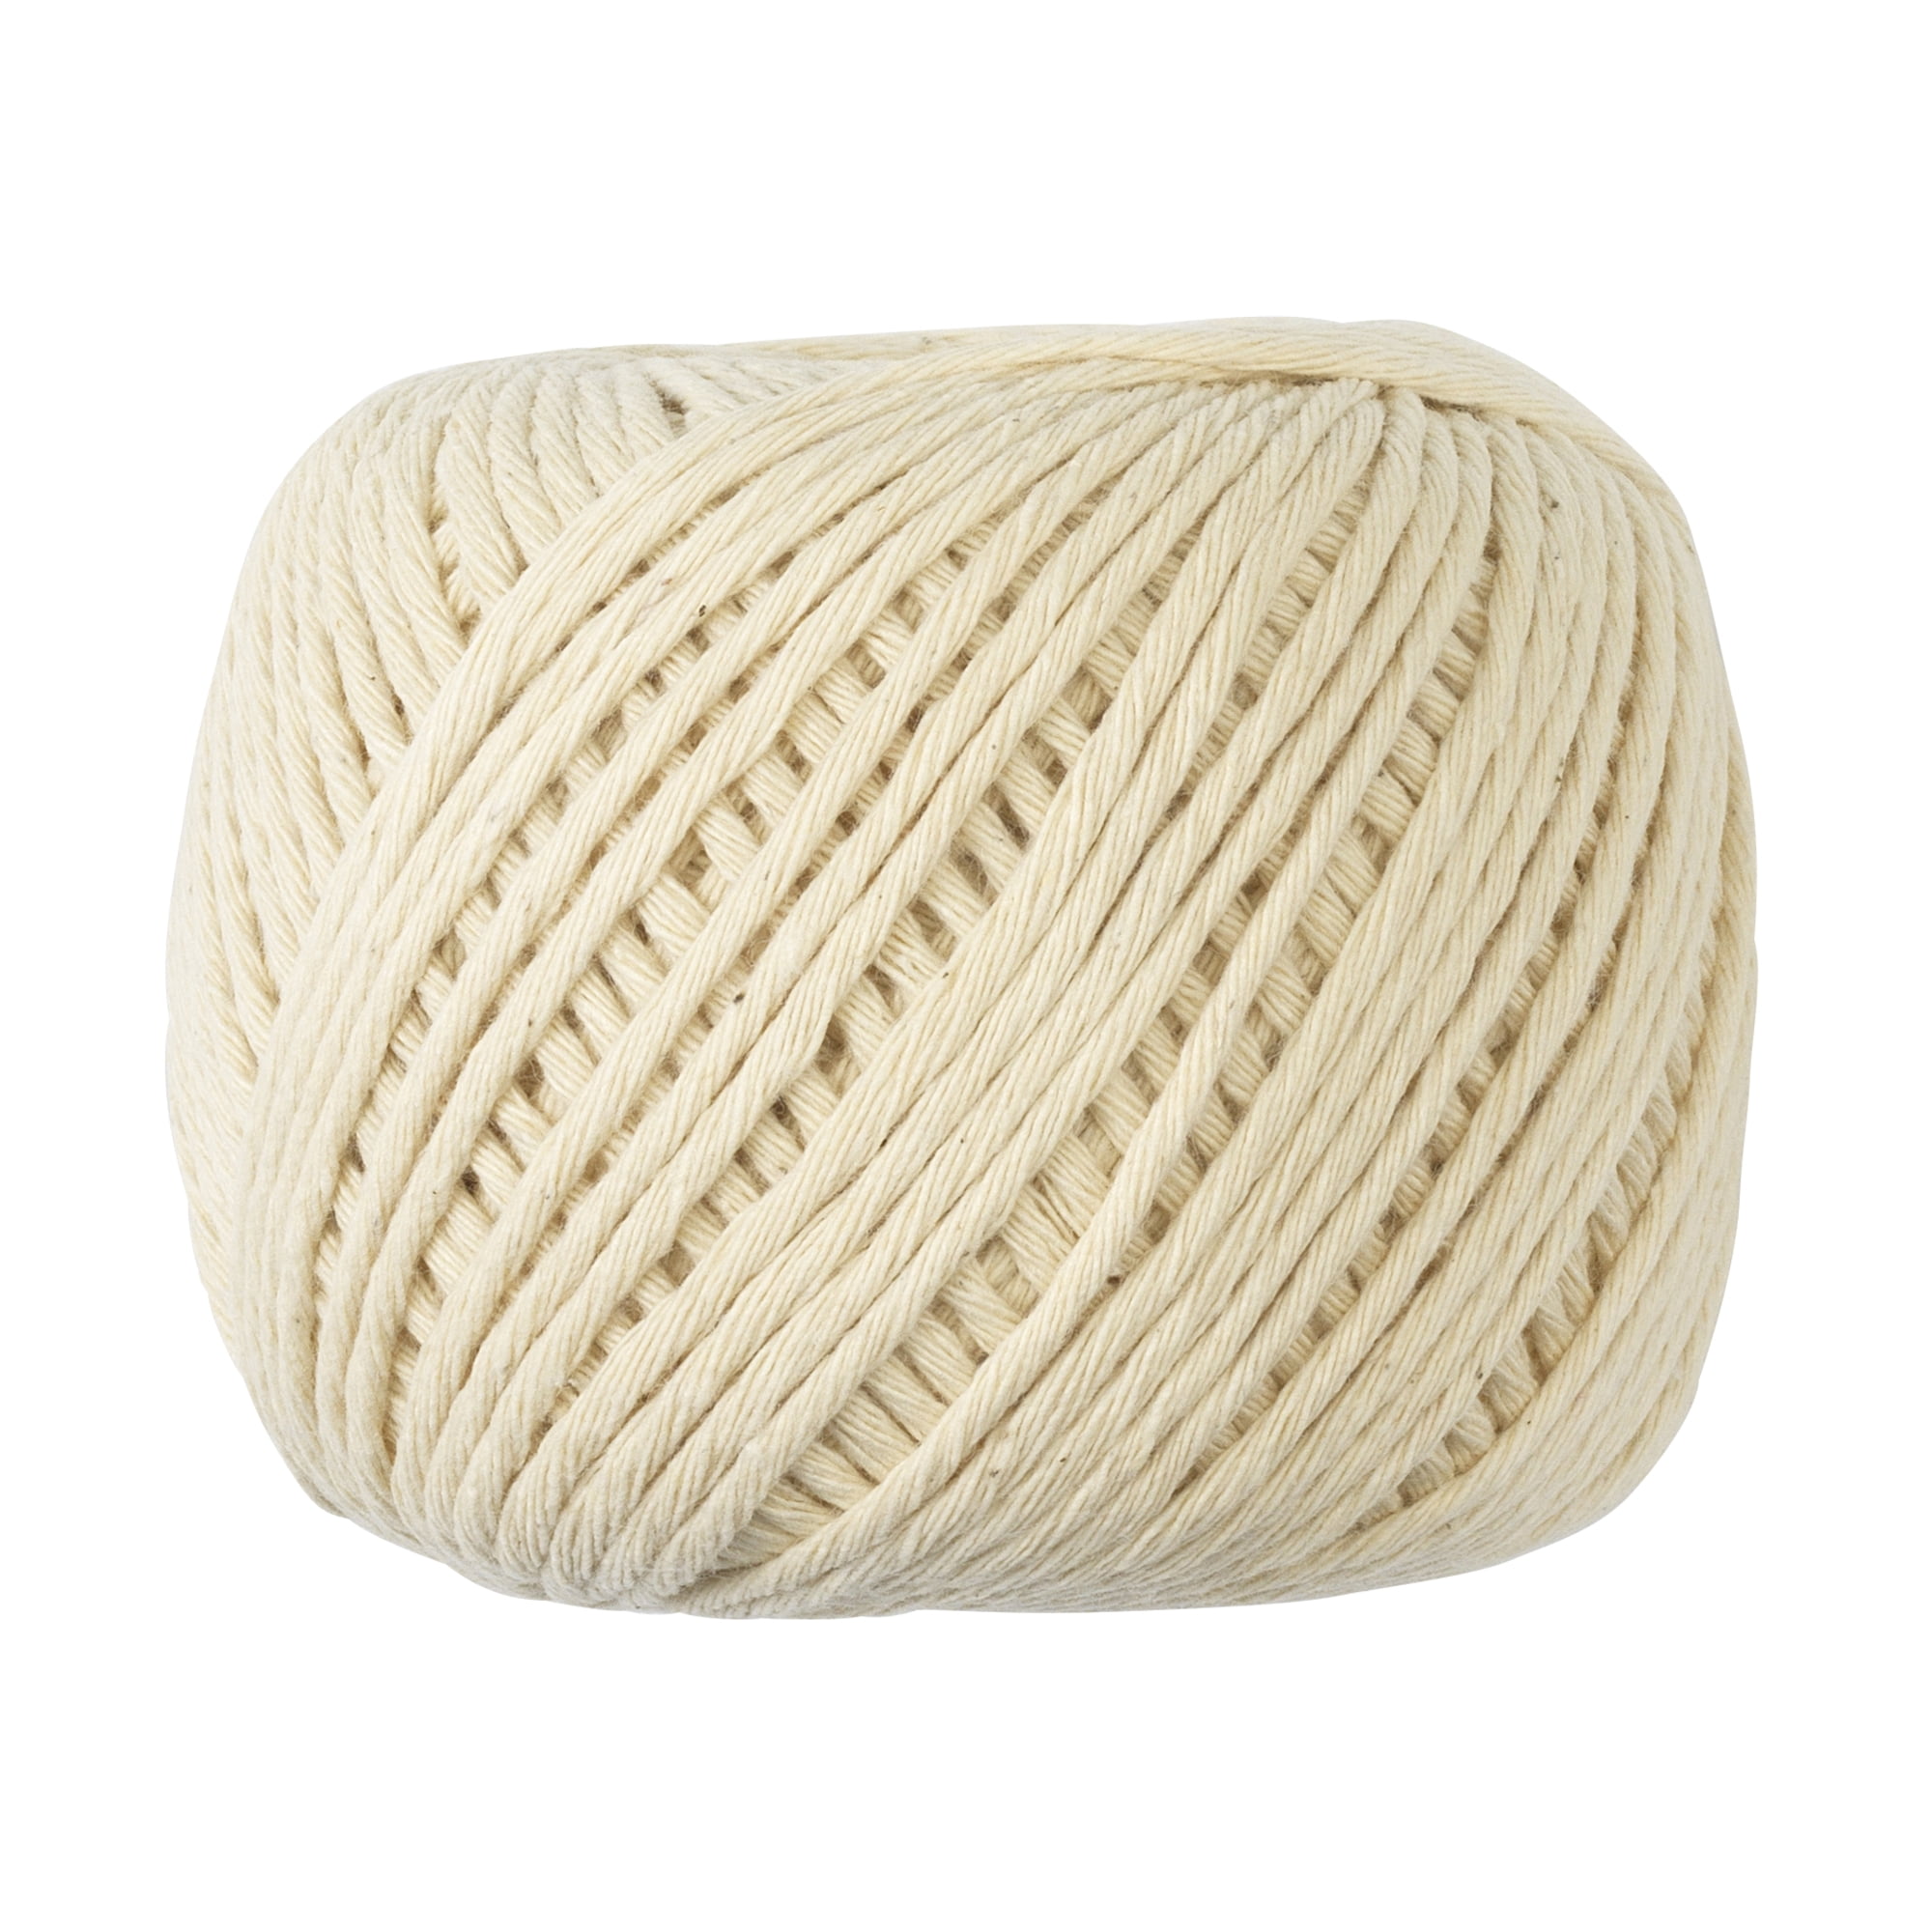 Everyday Living Twine Ball - White, 300 ft - Dillons Food Stores